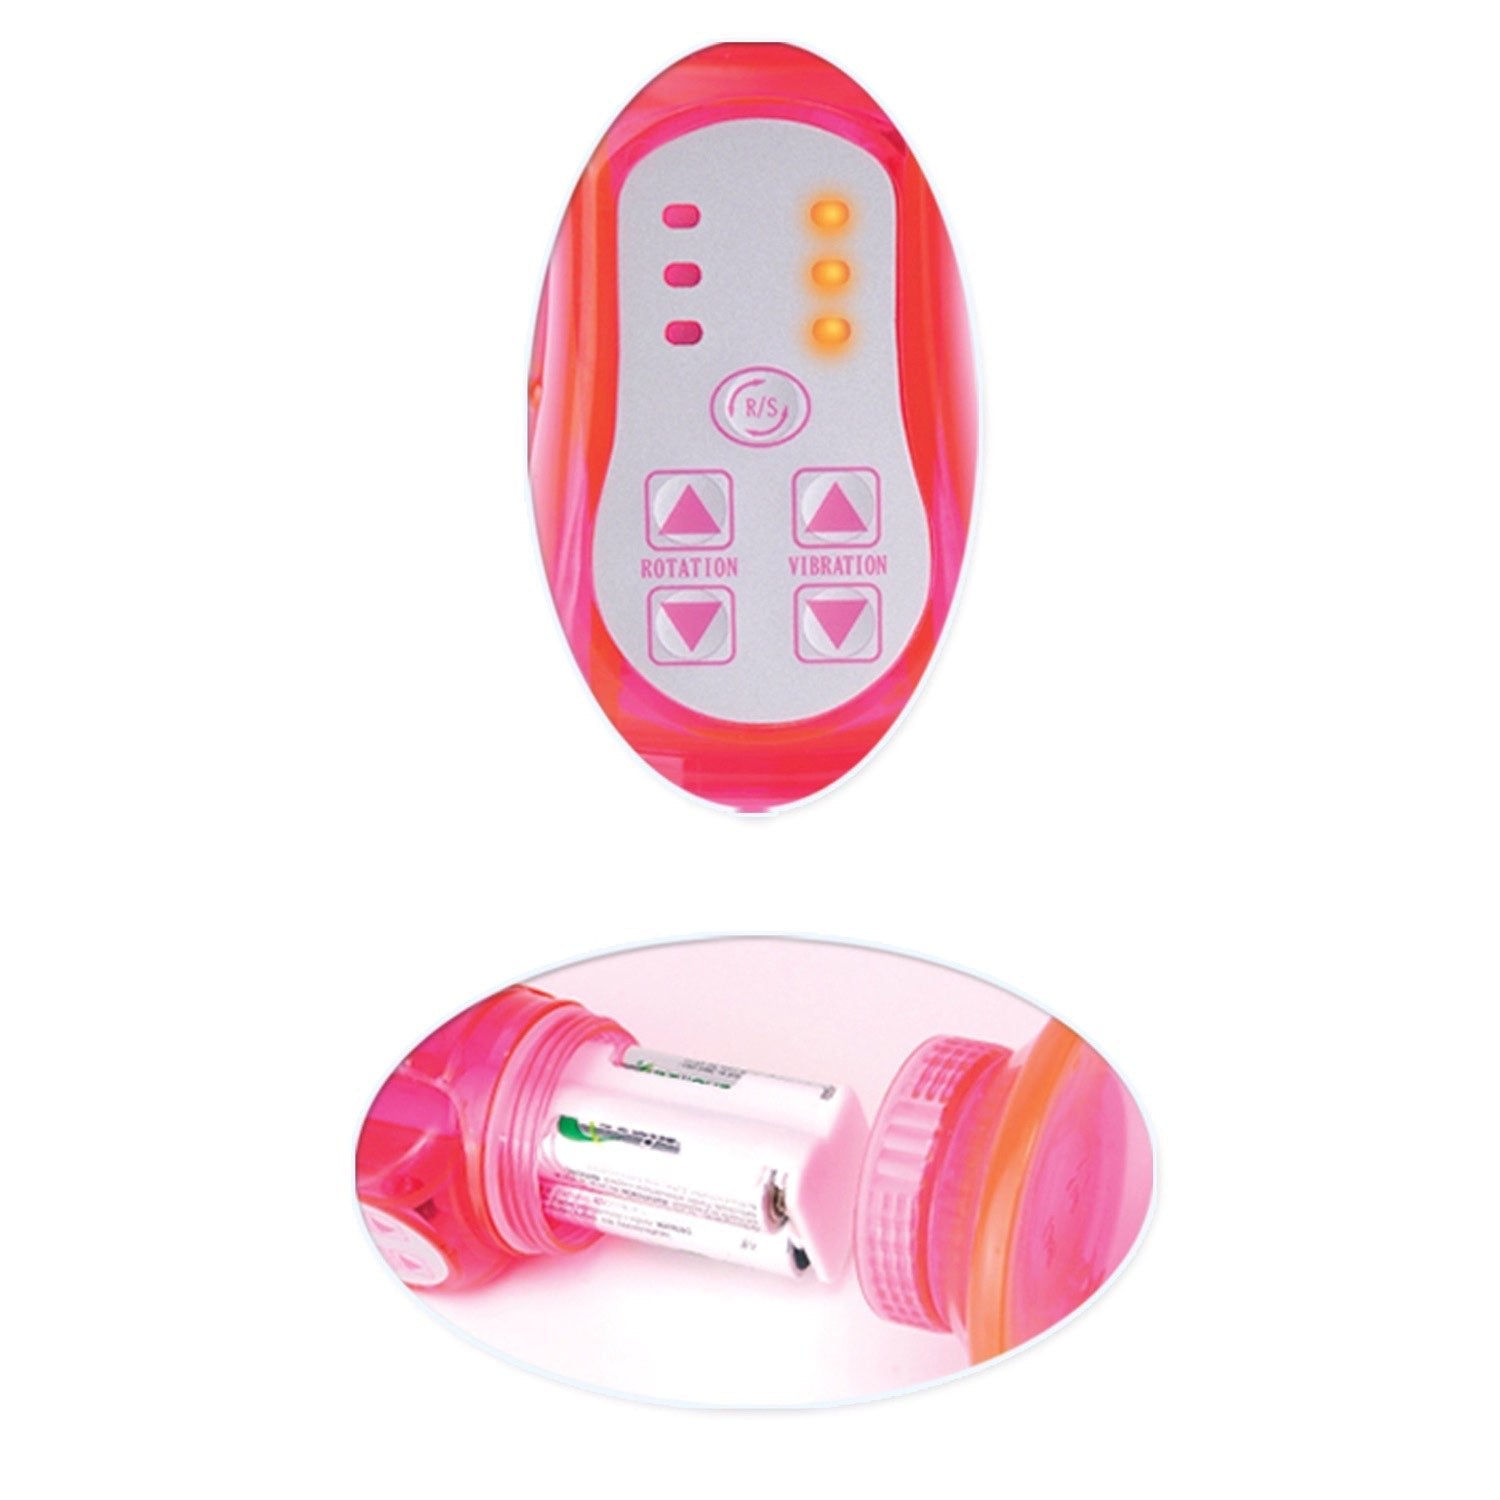  Deluxe Rotating Wall Bangers - Pink 7&quot; Pearl Vibrator with Rabbit Clit Stimulator by Pipedream